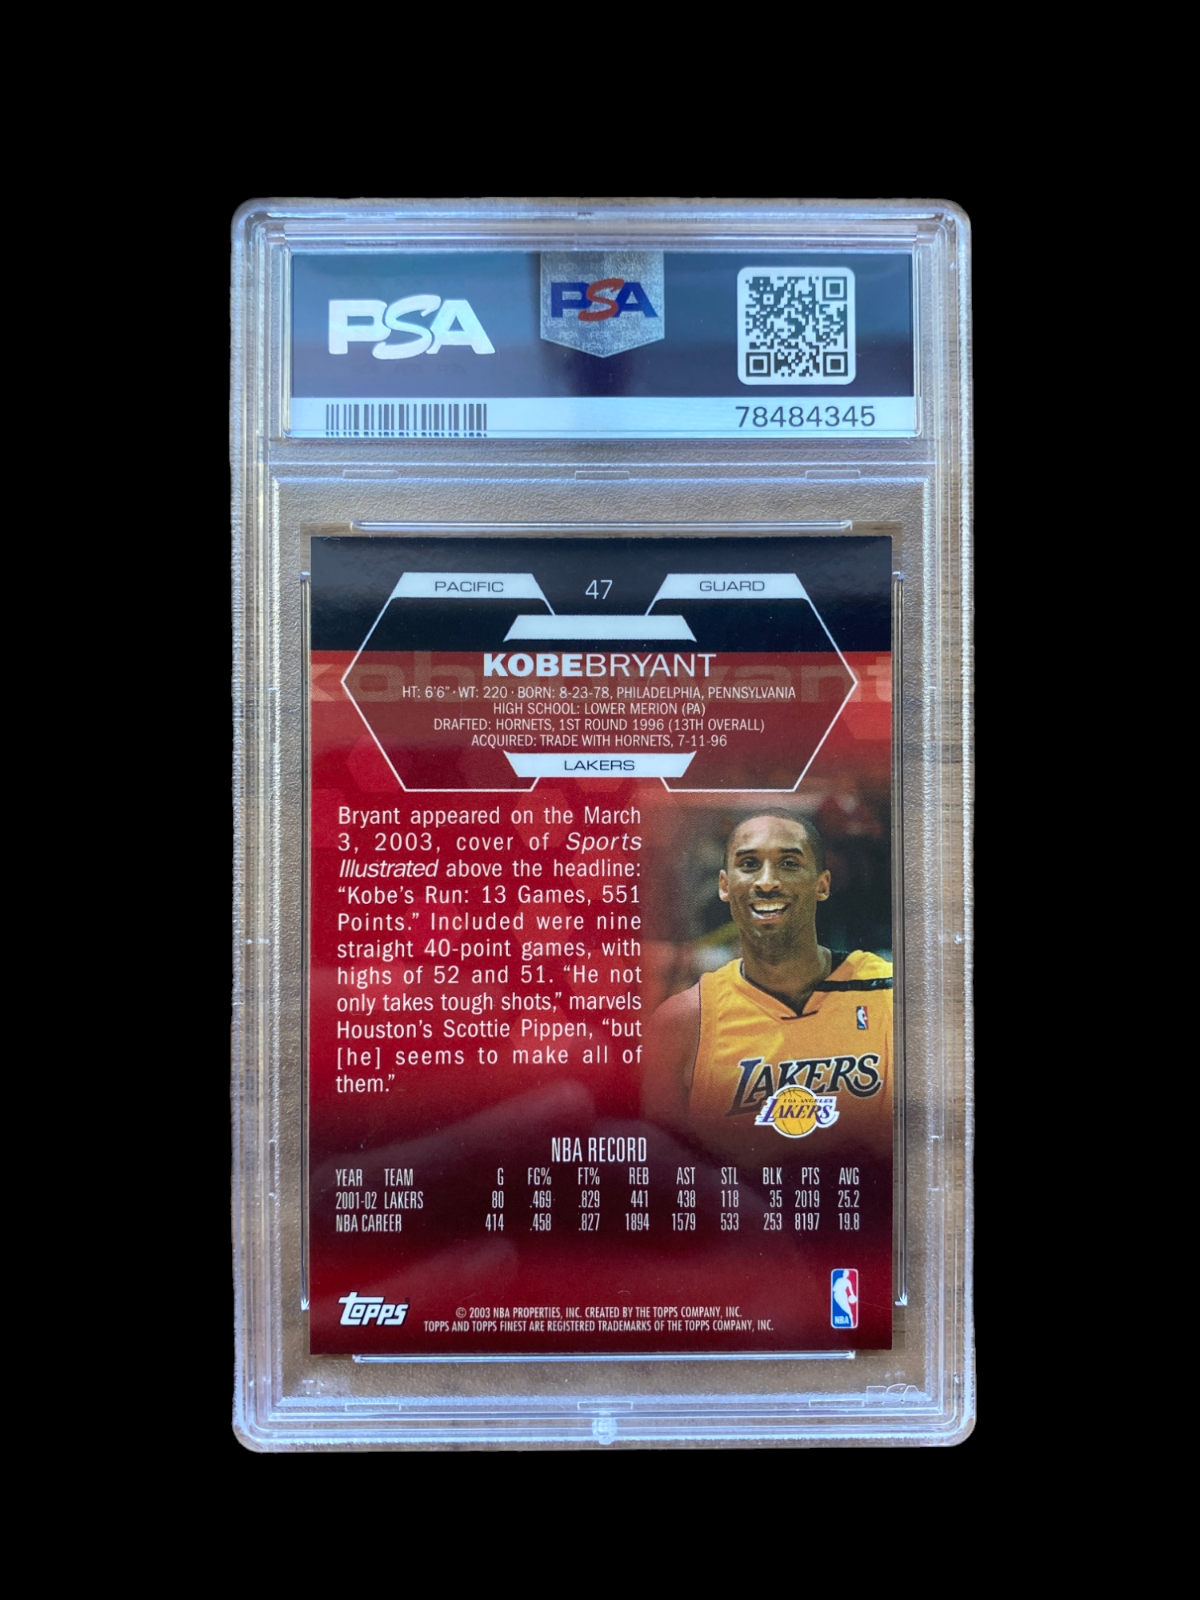 100% Authentic Kobe Bryant 2002 Topps Finest #47 PSA 10 Gem Lakers Card